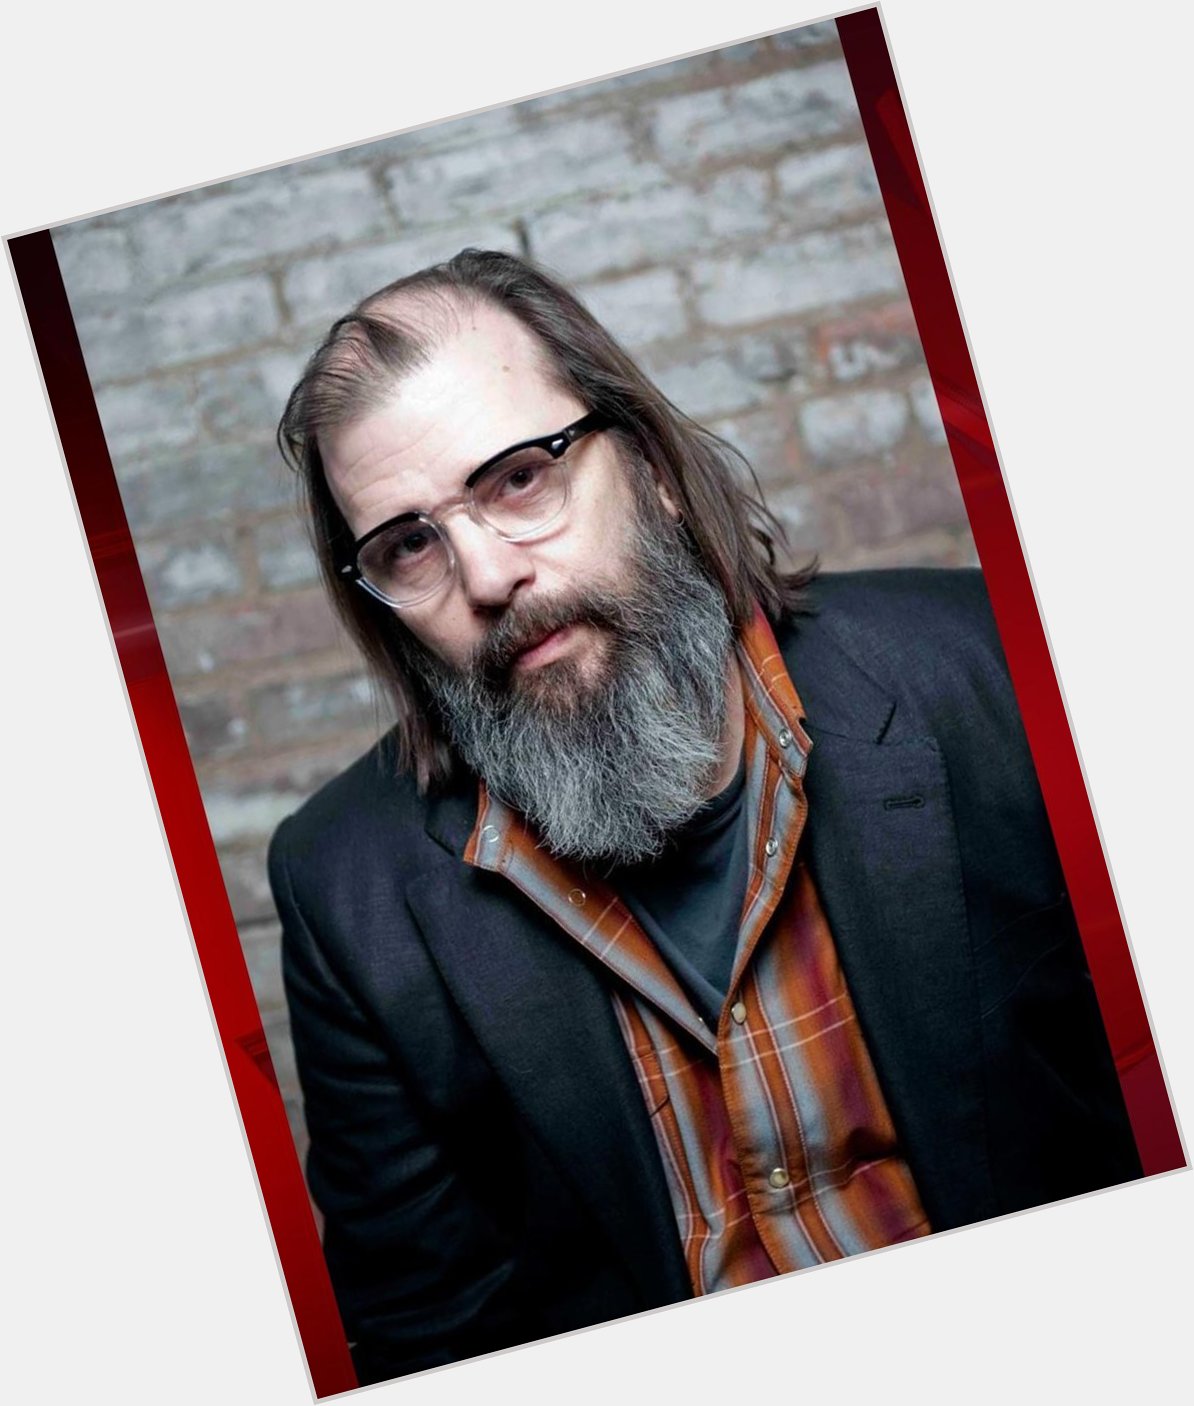 Happy birthday Steve Earle, one of the great American songwriters. 